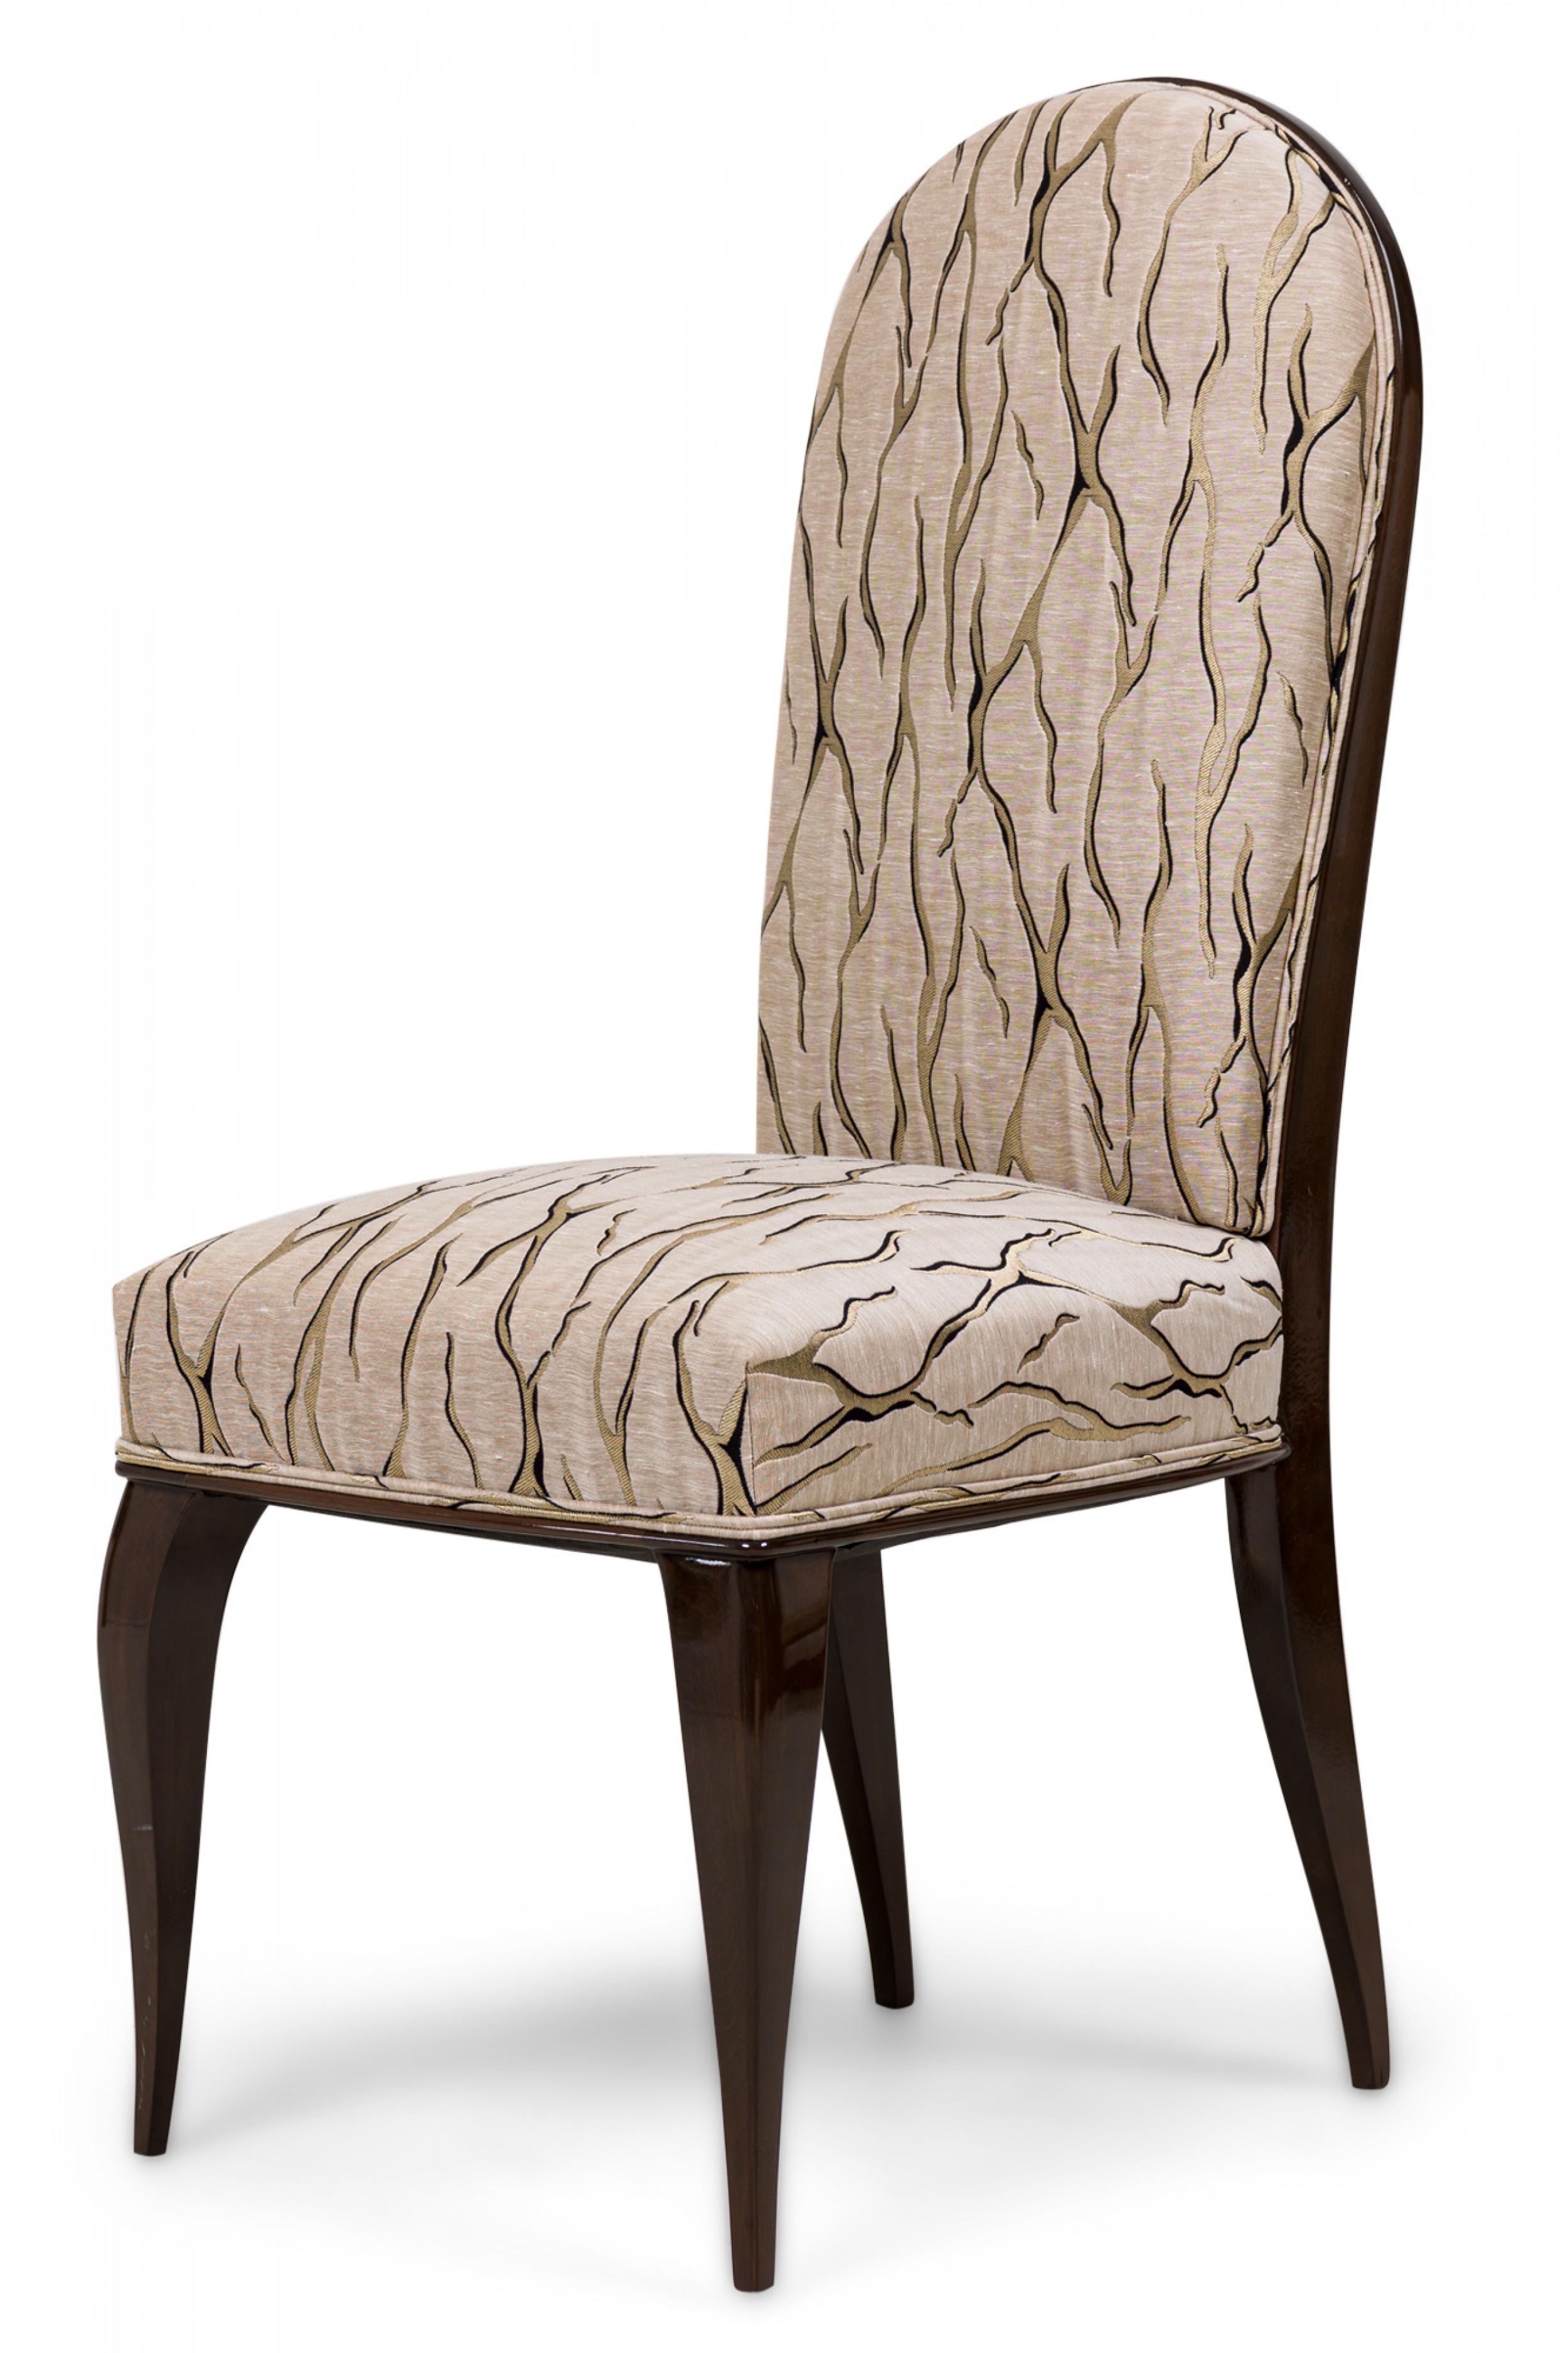 Dominique et Cie French Art Deco Mahogany Beige & Gold Upholstered Dining Chairs In Good Condition For Sale In New York, NY